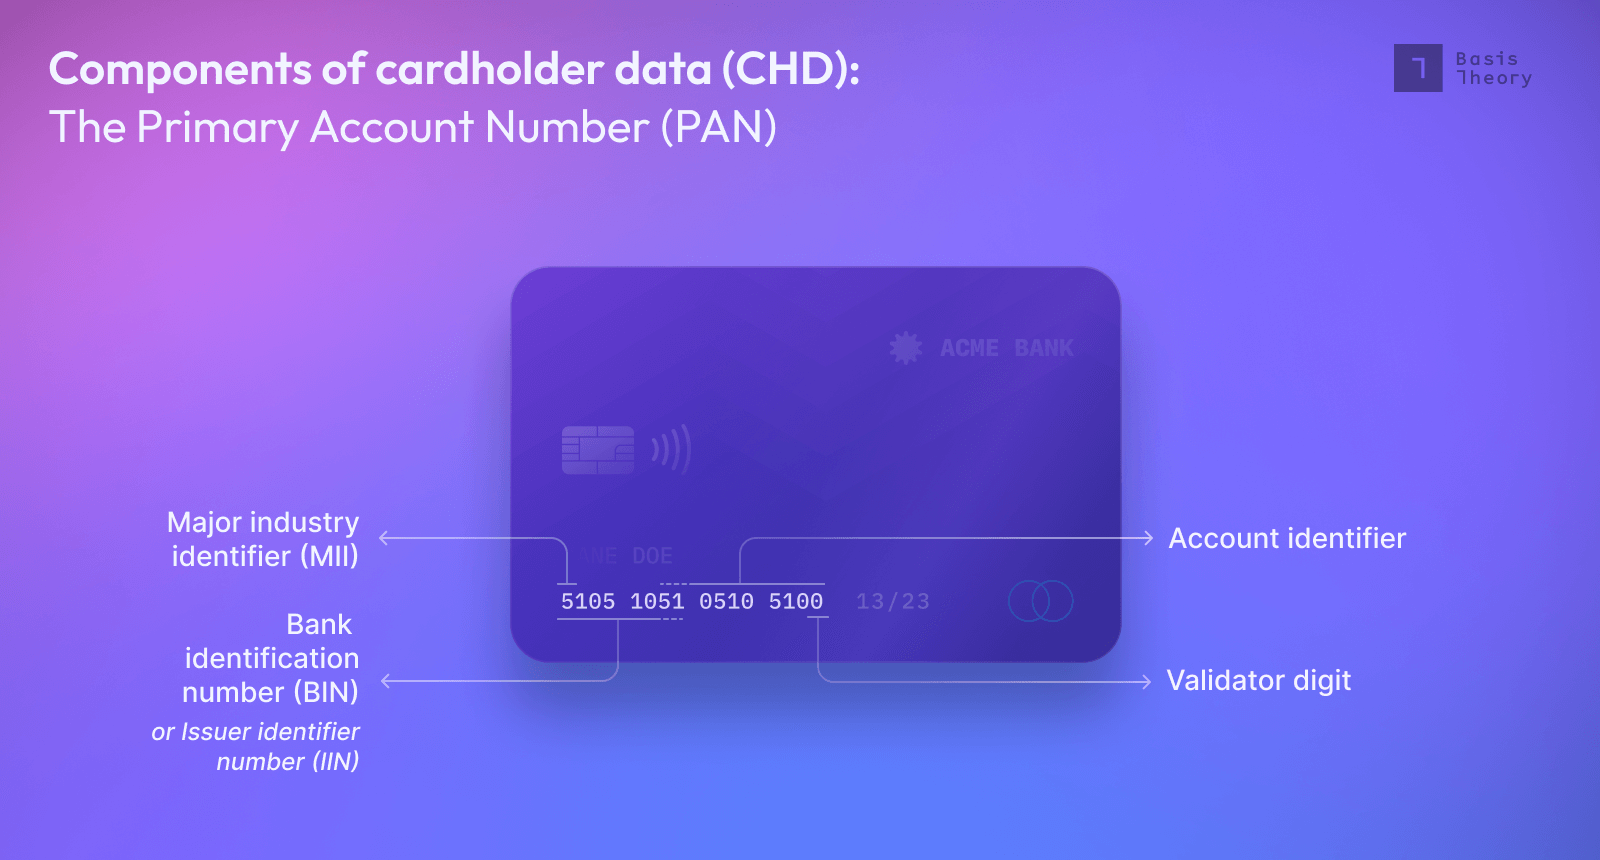 The 15 or 16-digit number on credit cards is called the Primary Account Number (PAN) is made up the Bank Identification Number, Account Identifier, and Validator digit. 